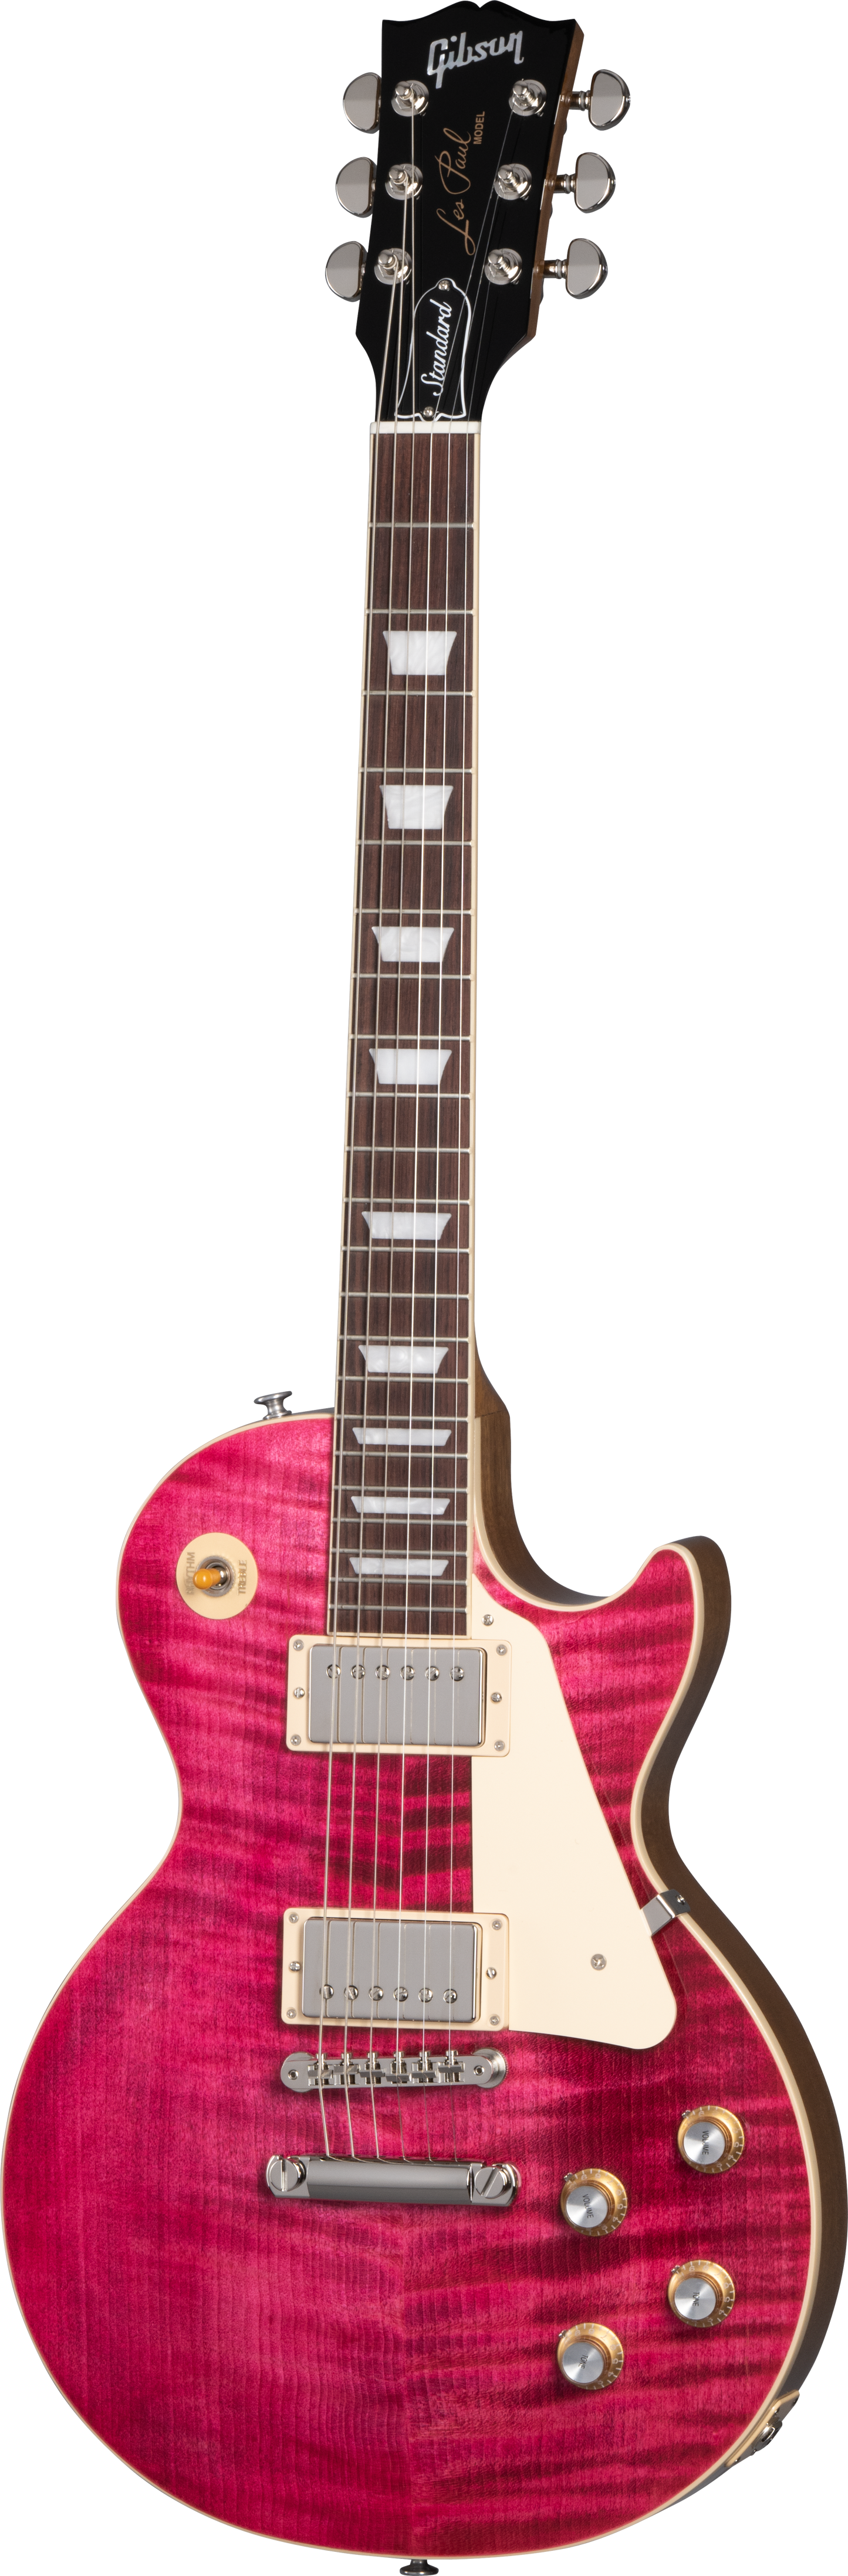 Full frontal of Gibson Les Paul Standard 60s Figured Top Translucent Fuchsia.